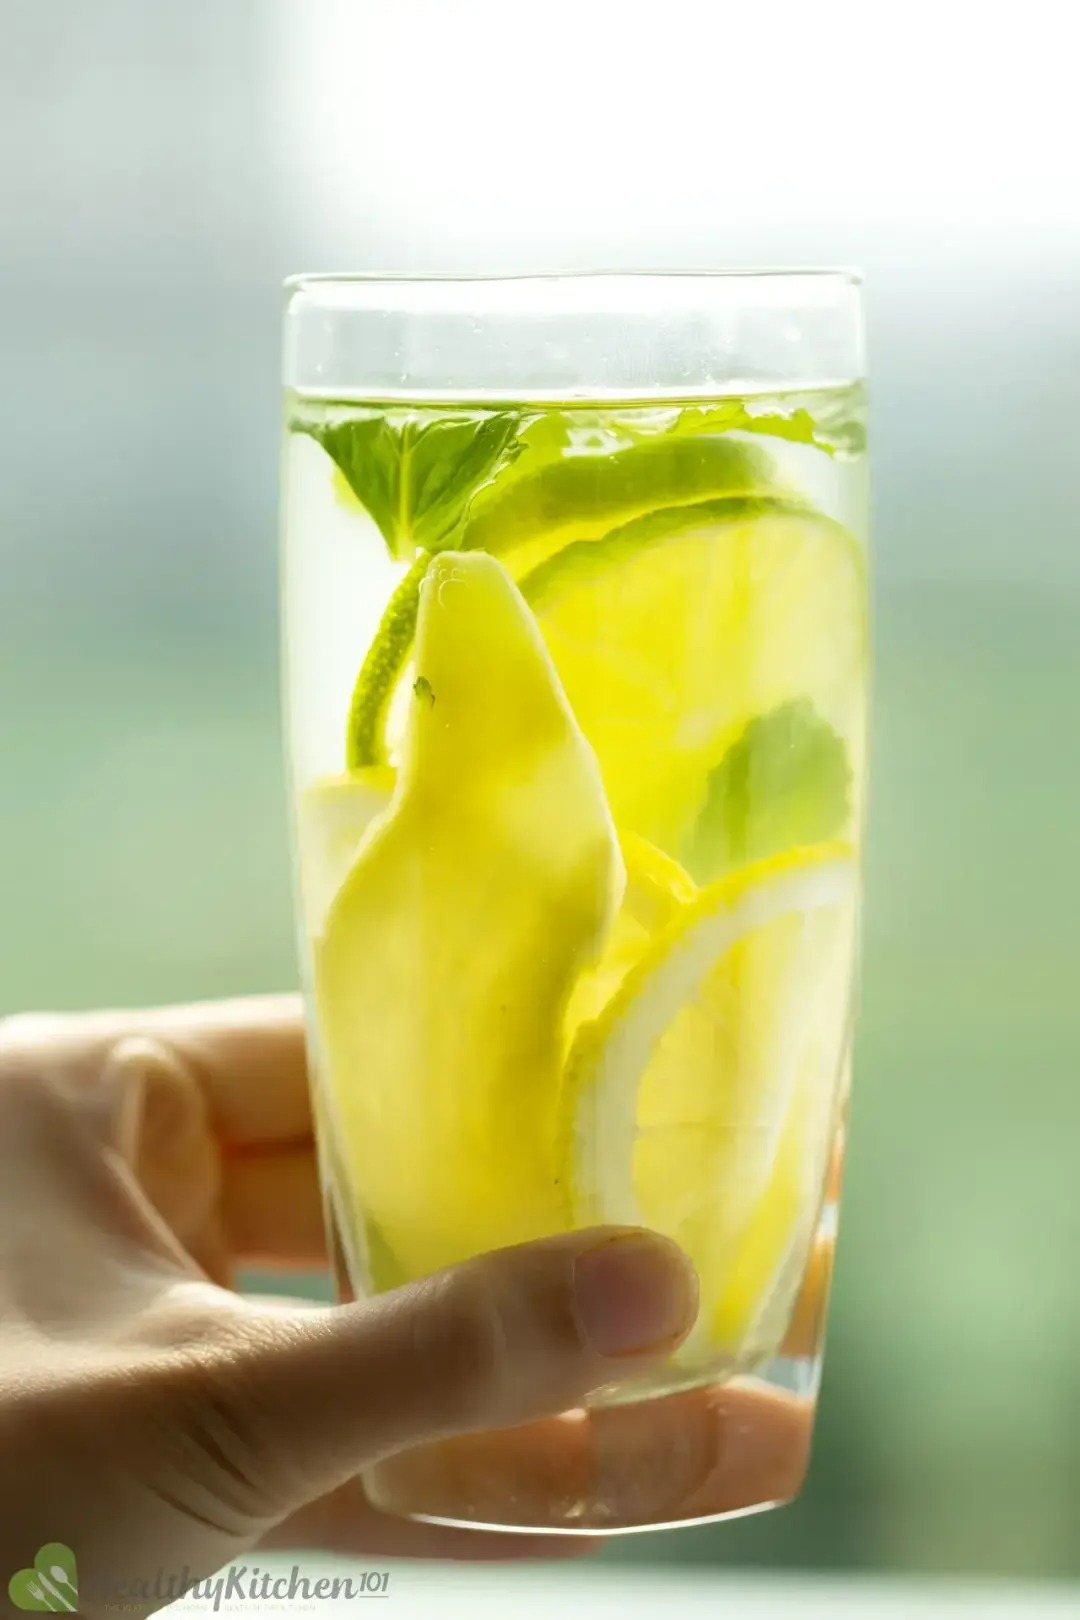 A hand holding a tall glass filled with mint leaves, sliced lemon wheels, and sliced ginger submerged in clear water